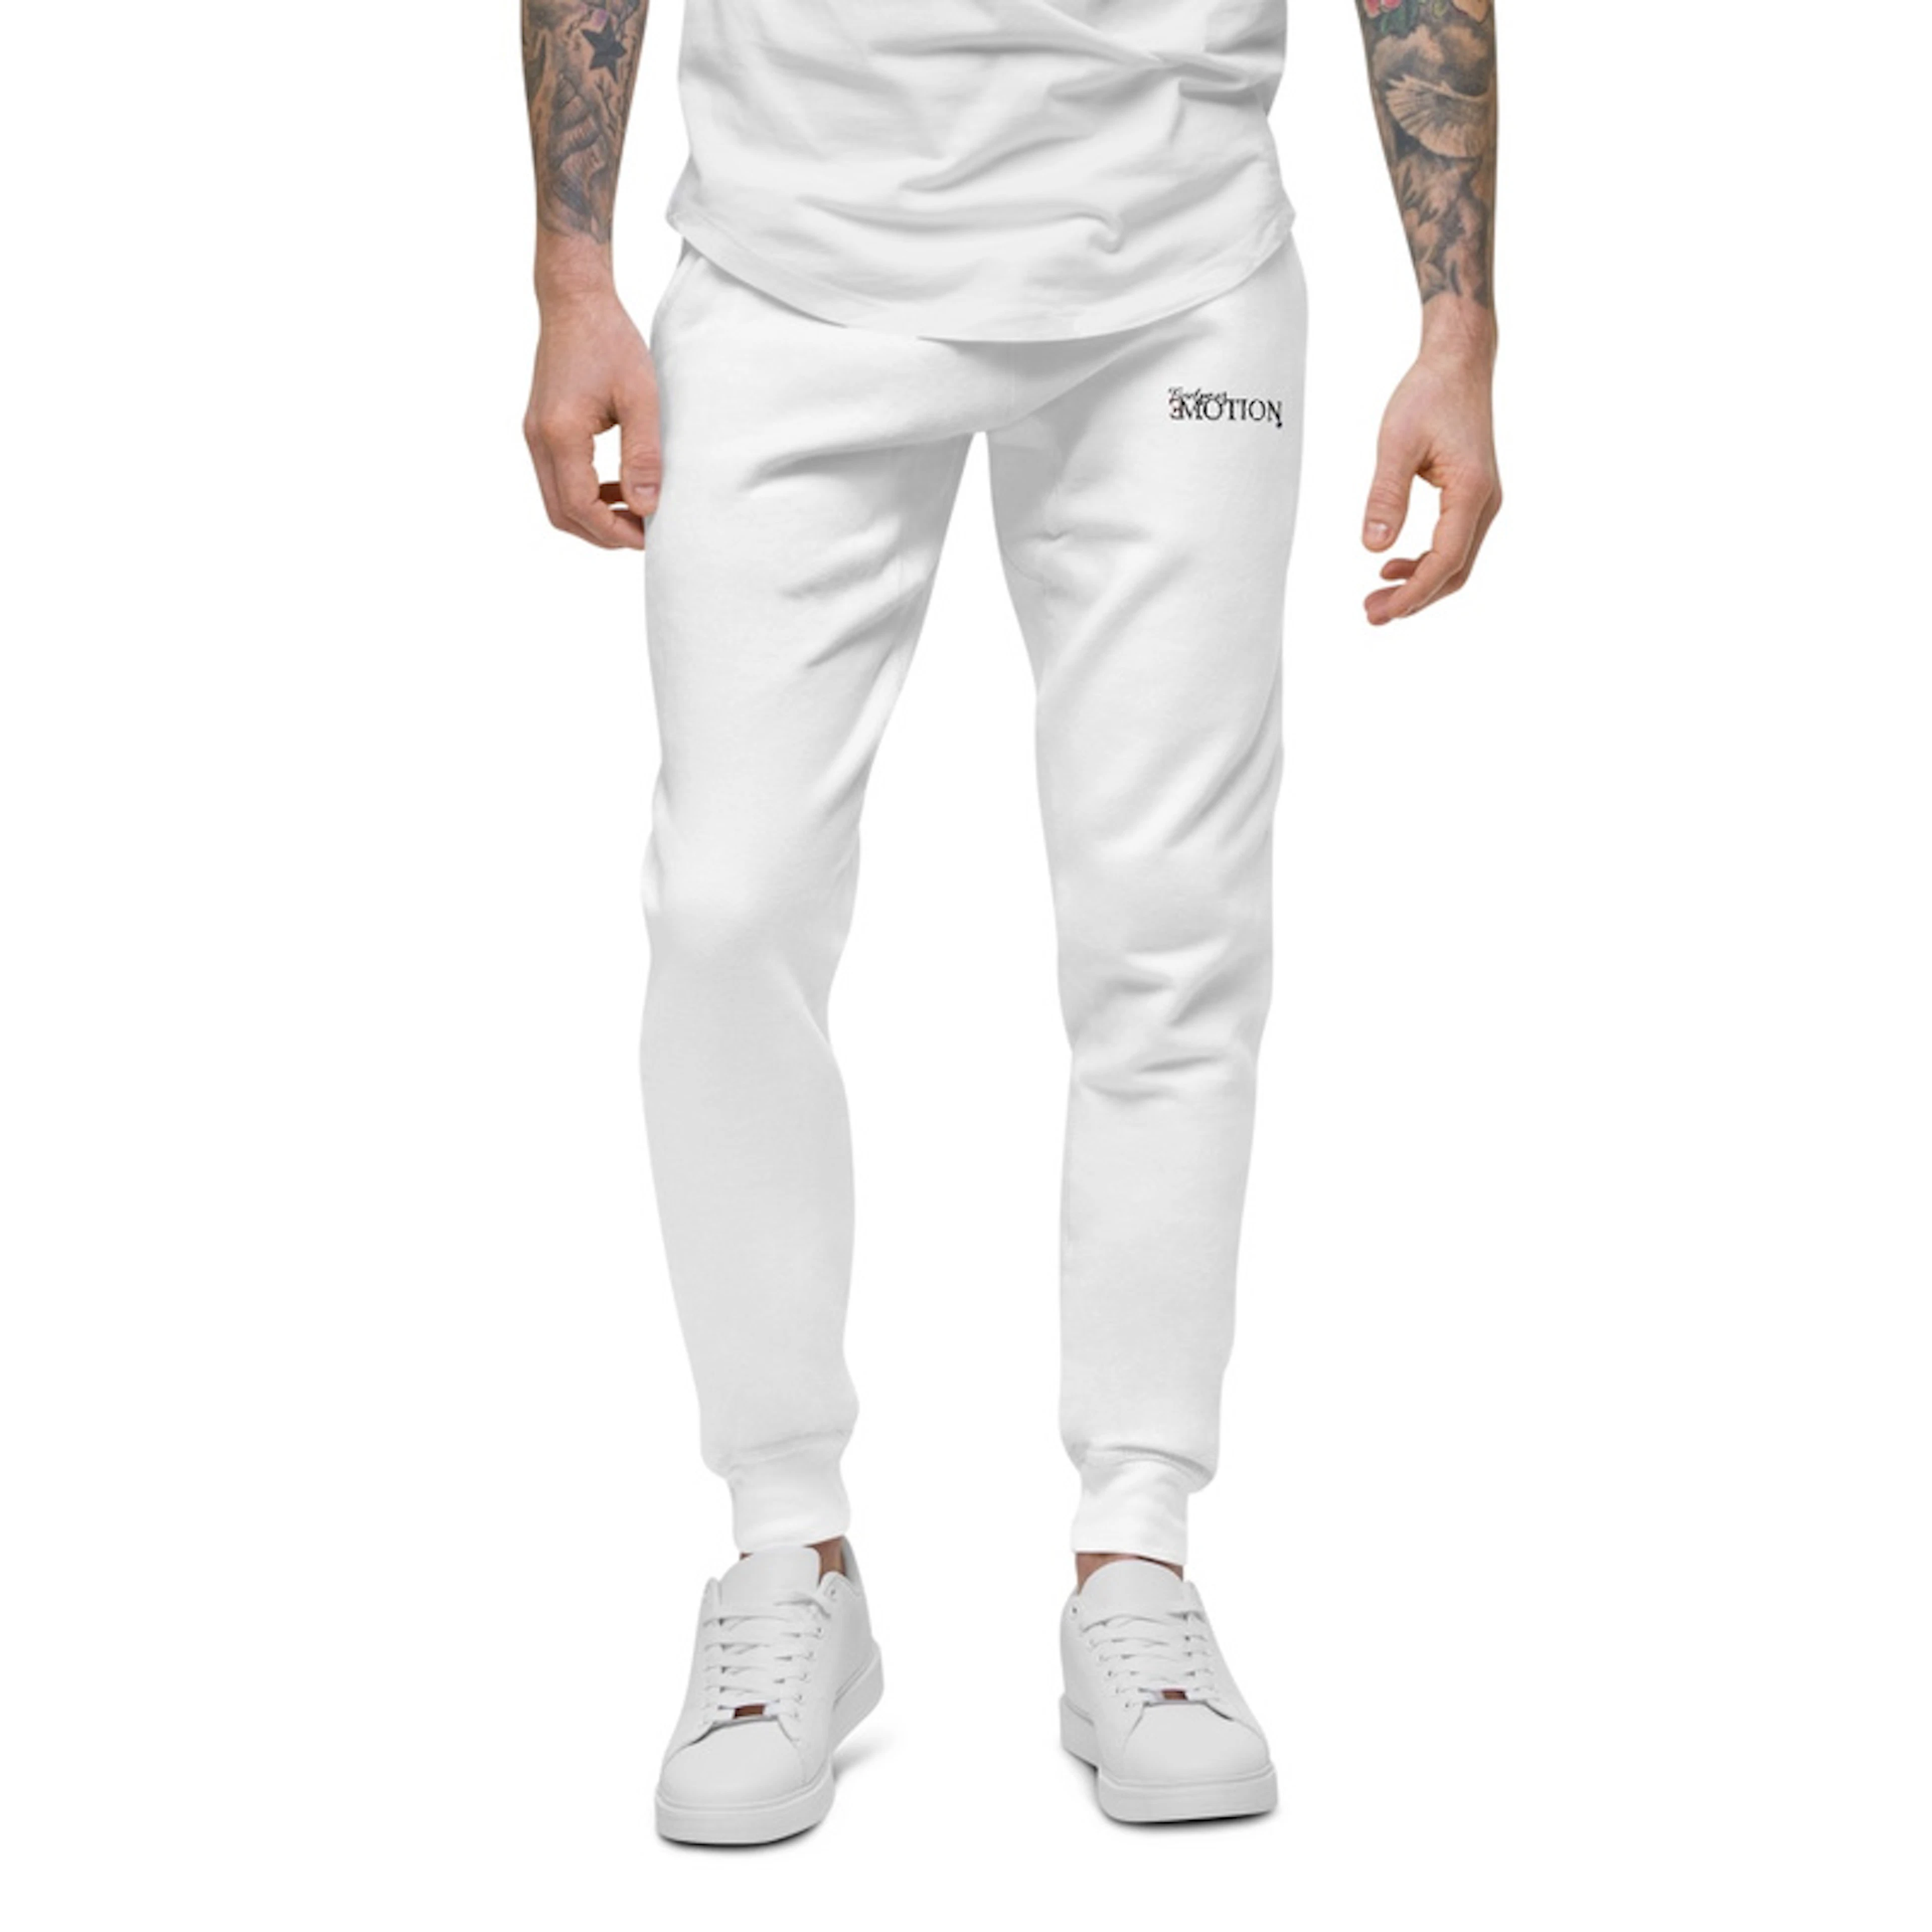 Find your motion white stitch joggers